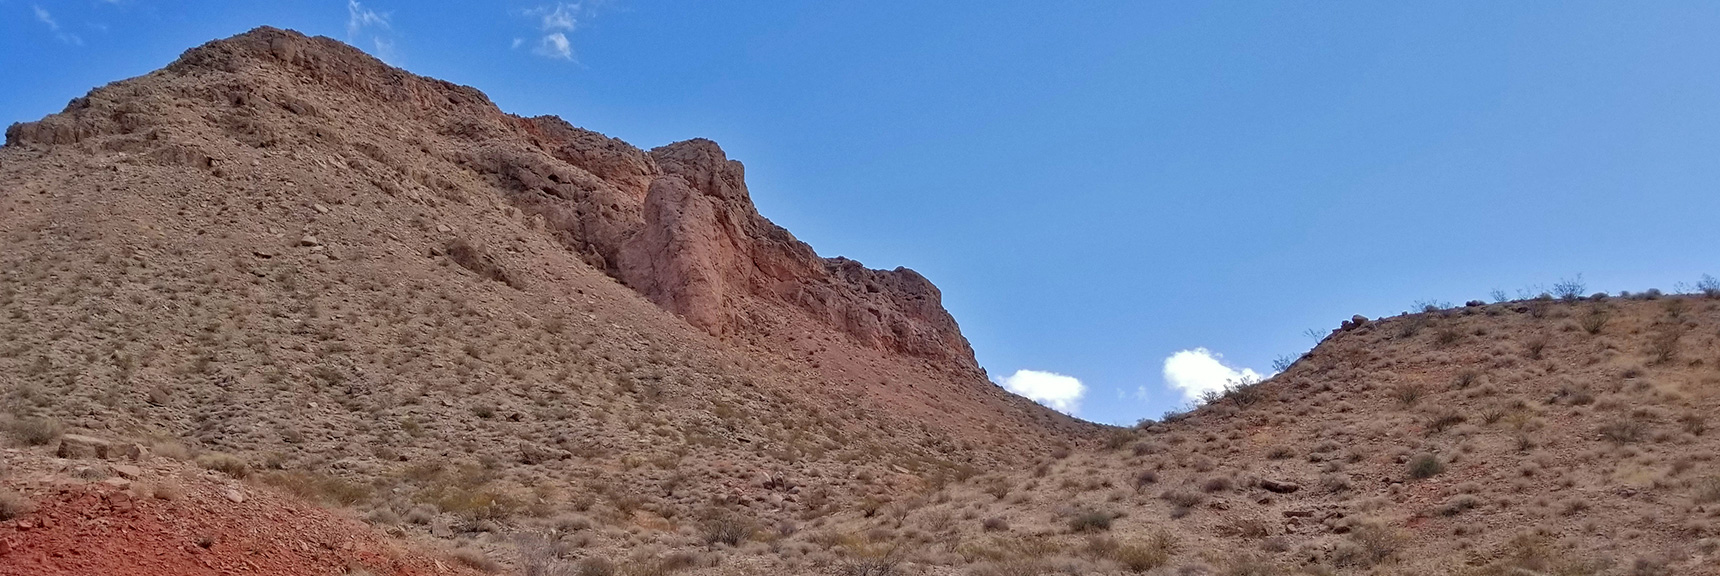 High Ridge Saddle Pass to Return Route | Northern Bowl of Fire | Lake Mead National Recreation Area, Nevada